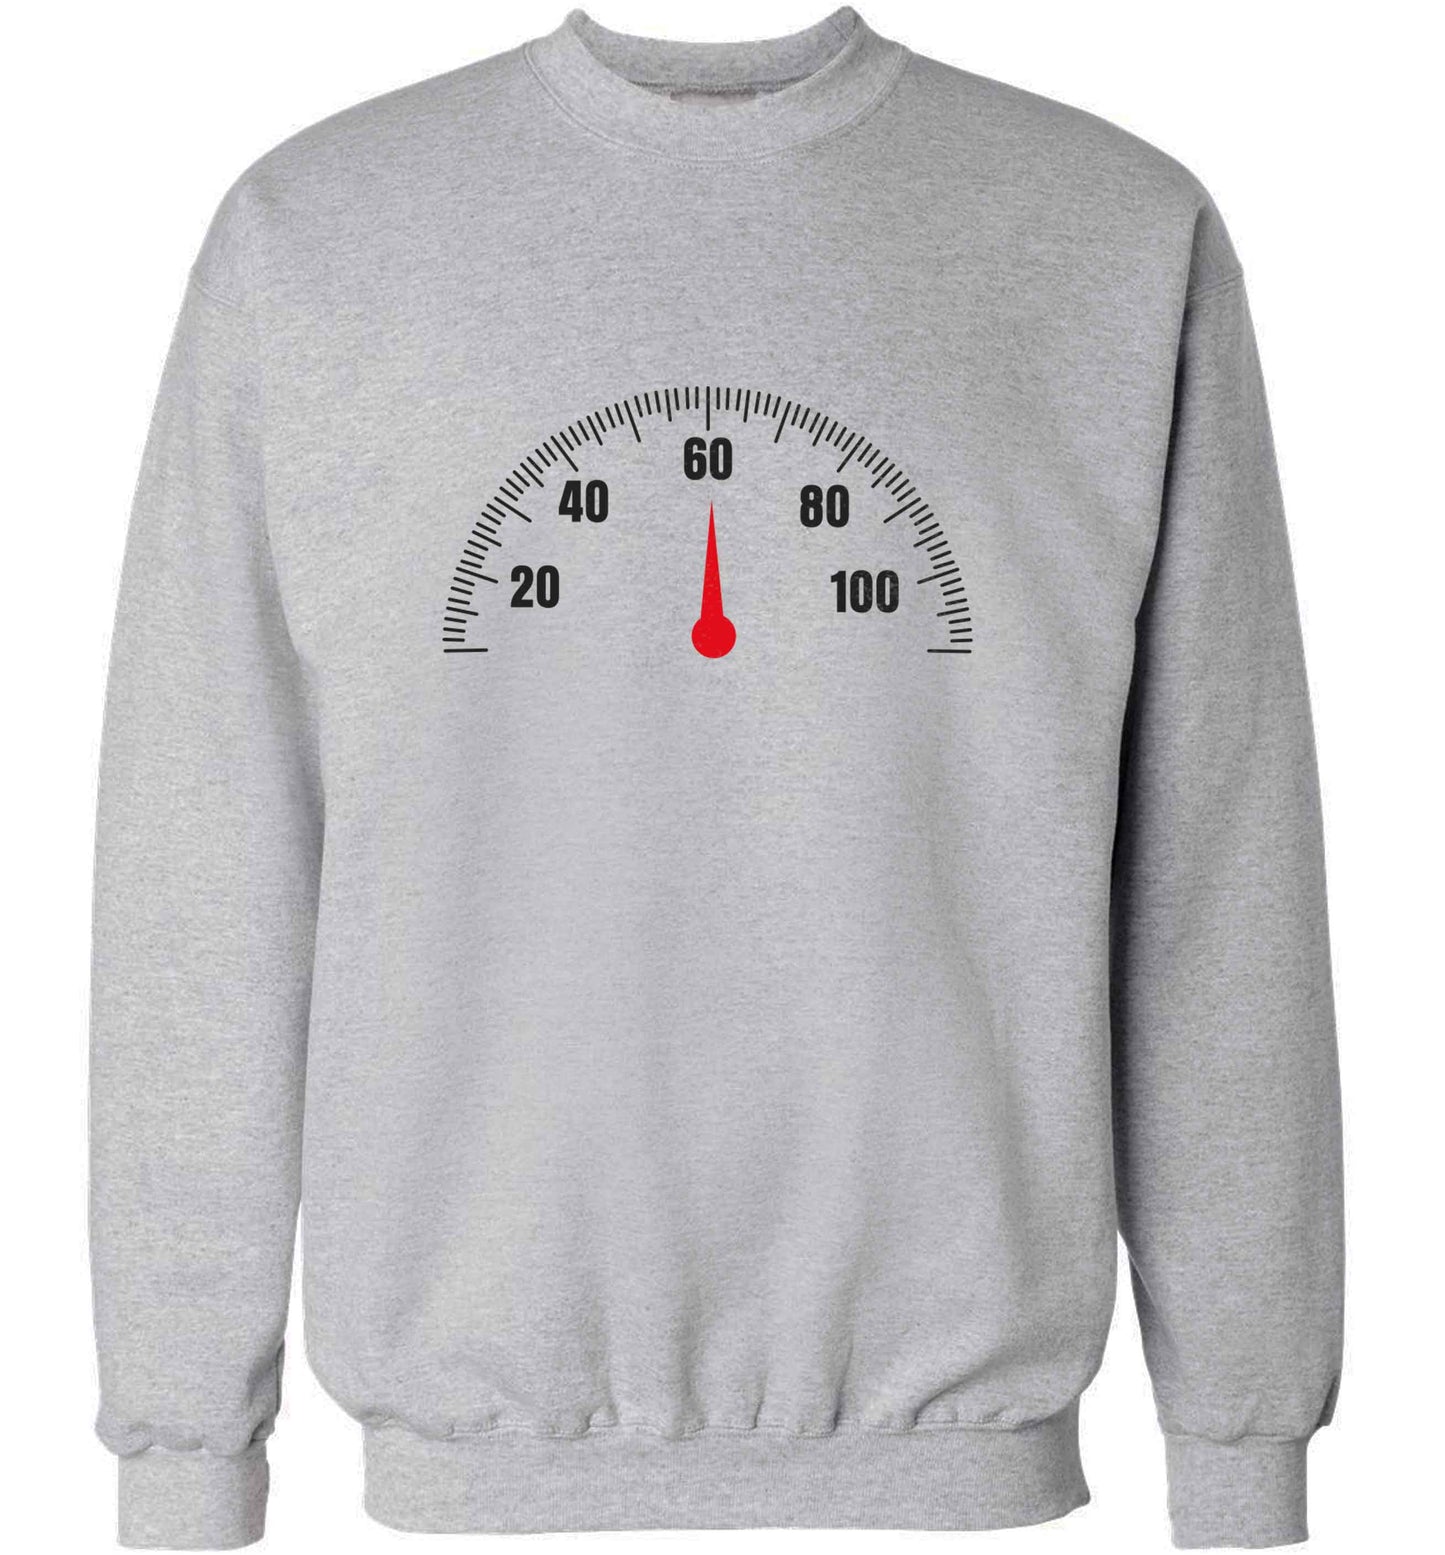 Speed dial 60 adult's unisex grey sweater 2XL